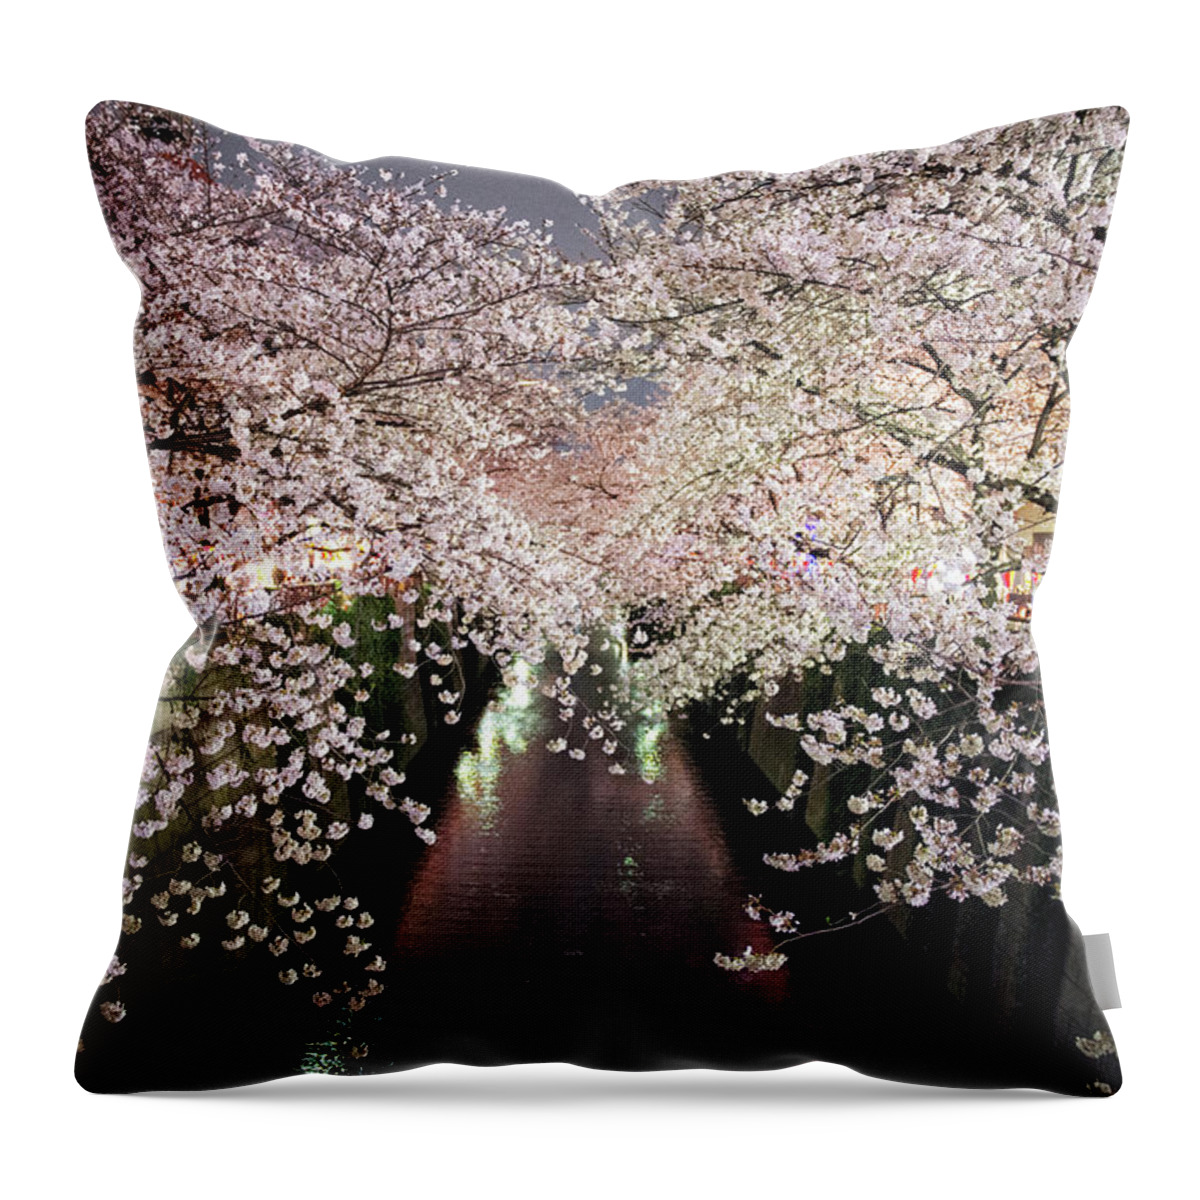 Outdoors Throw Pillow featuring the photograph Cherry Blossoms Trees Across The by By Cads